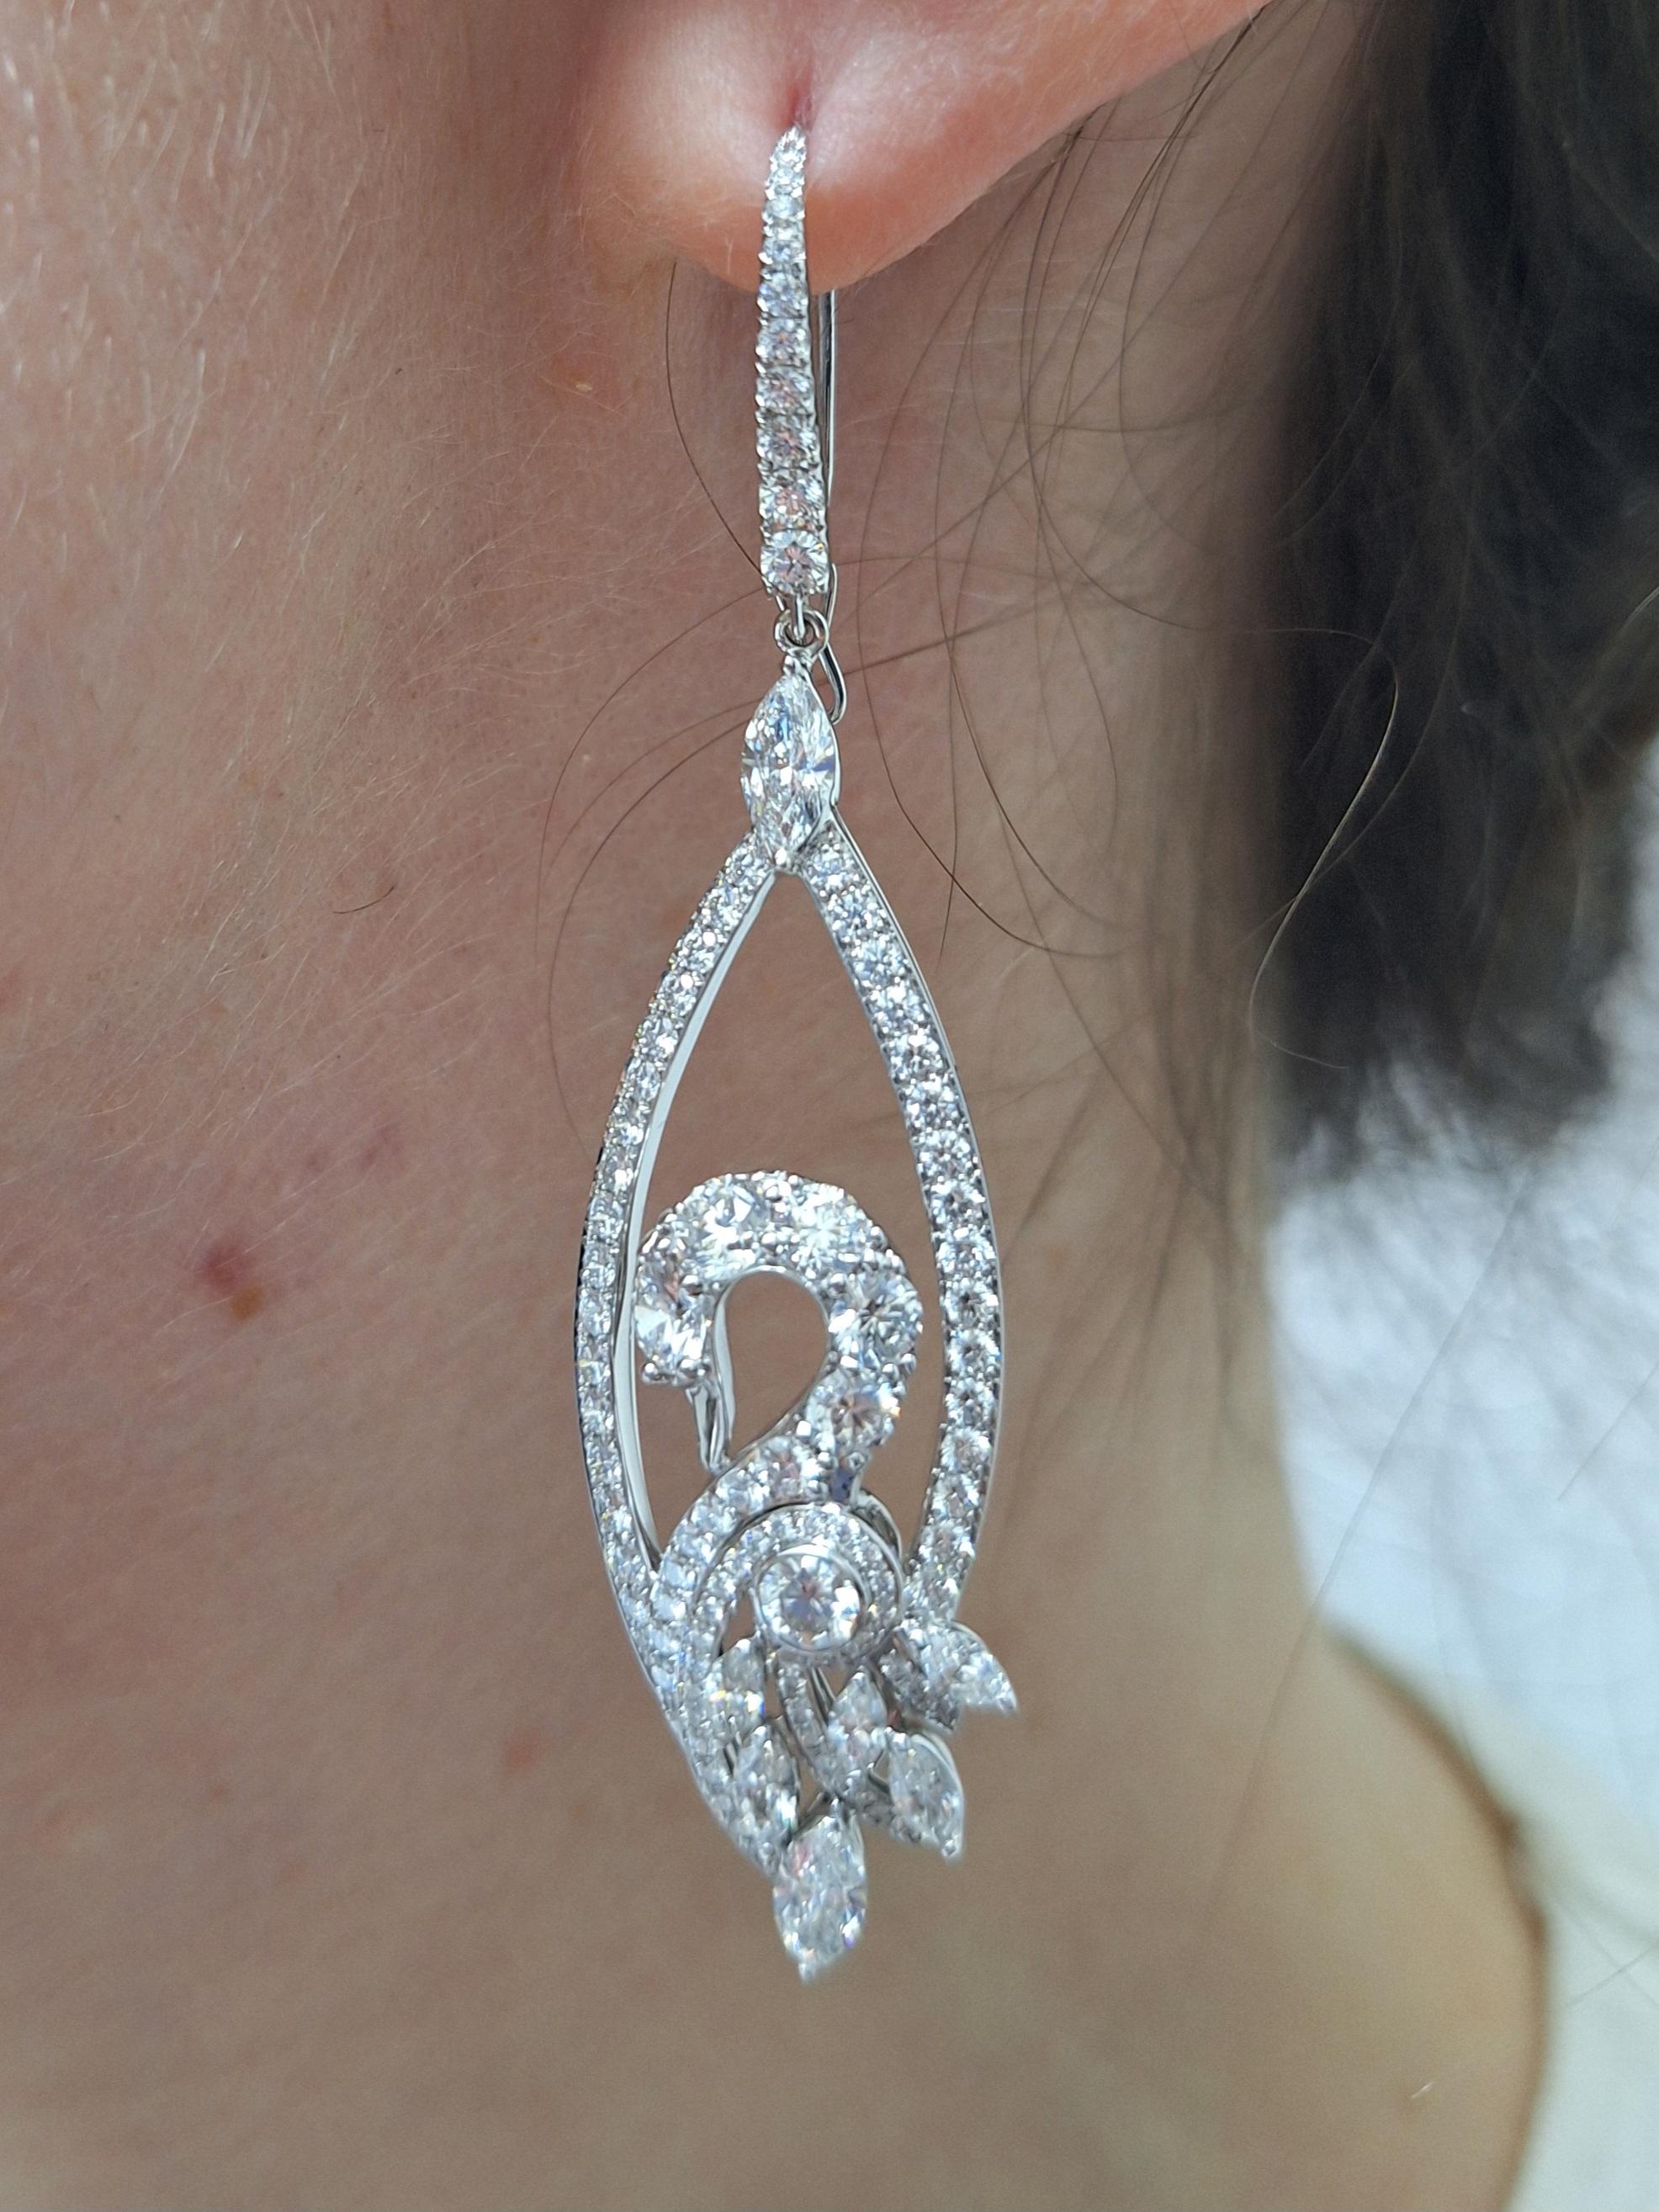 Timeless elegant piece crafted in 18Kt White Gold Graff Diamond Swan Necklace & Earrings Set features:

Necklace: 25 Marquise Cut Diamonds approx. 3.16Ctw & 141 Round Cut Diamonds approx. 8.11Ctw

Earrings: 14 Marquise Cut Diamonds approx. 2.17Ctw &